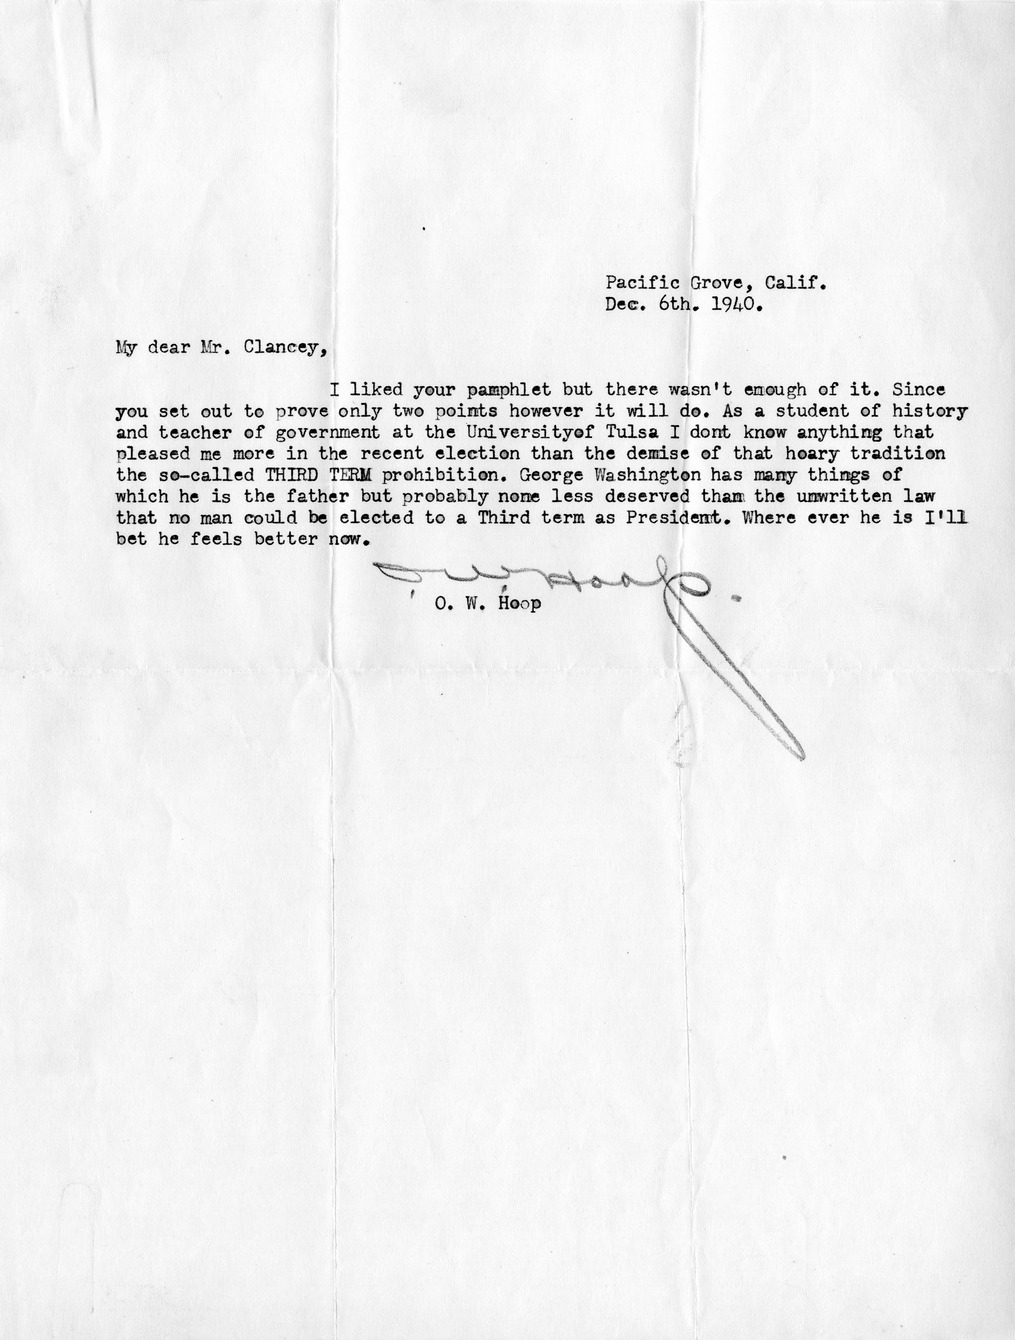 Letter from O.W. Hoop to Daniel F. Clancy